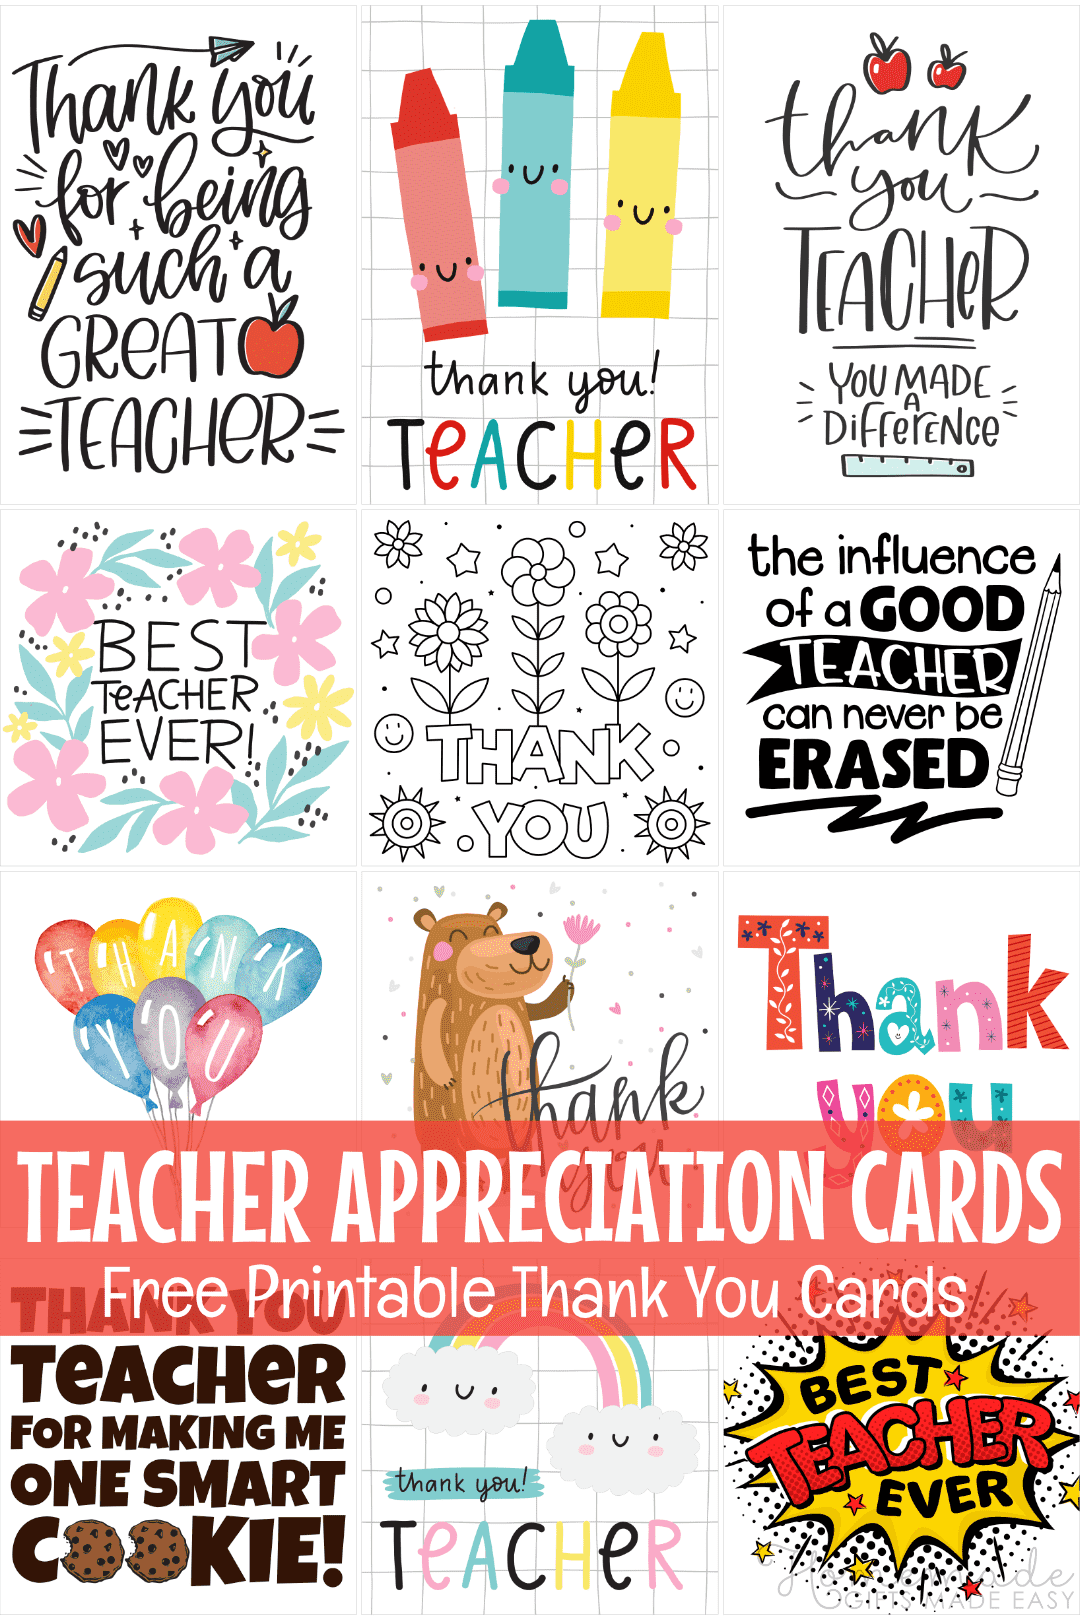 Free Teacher Appreciation Cards to Print at Home